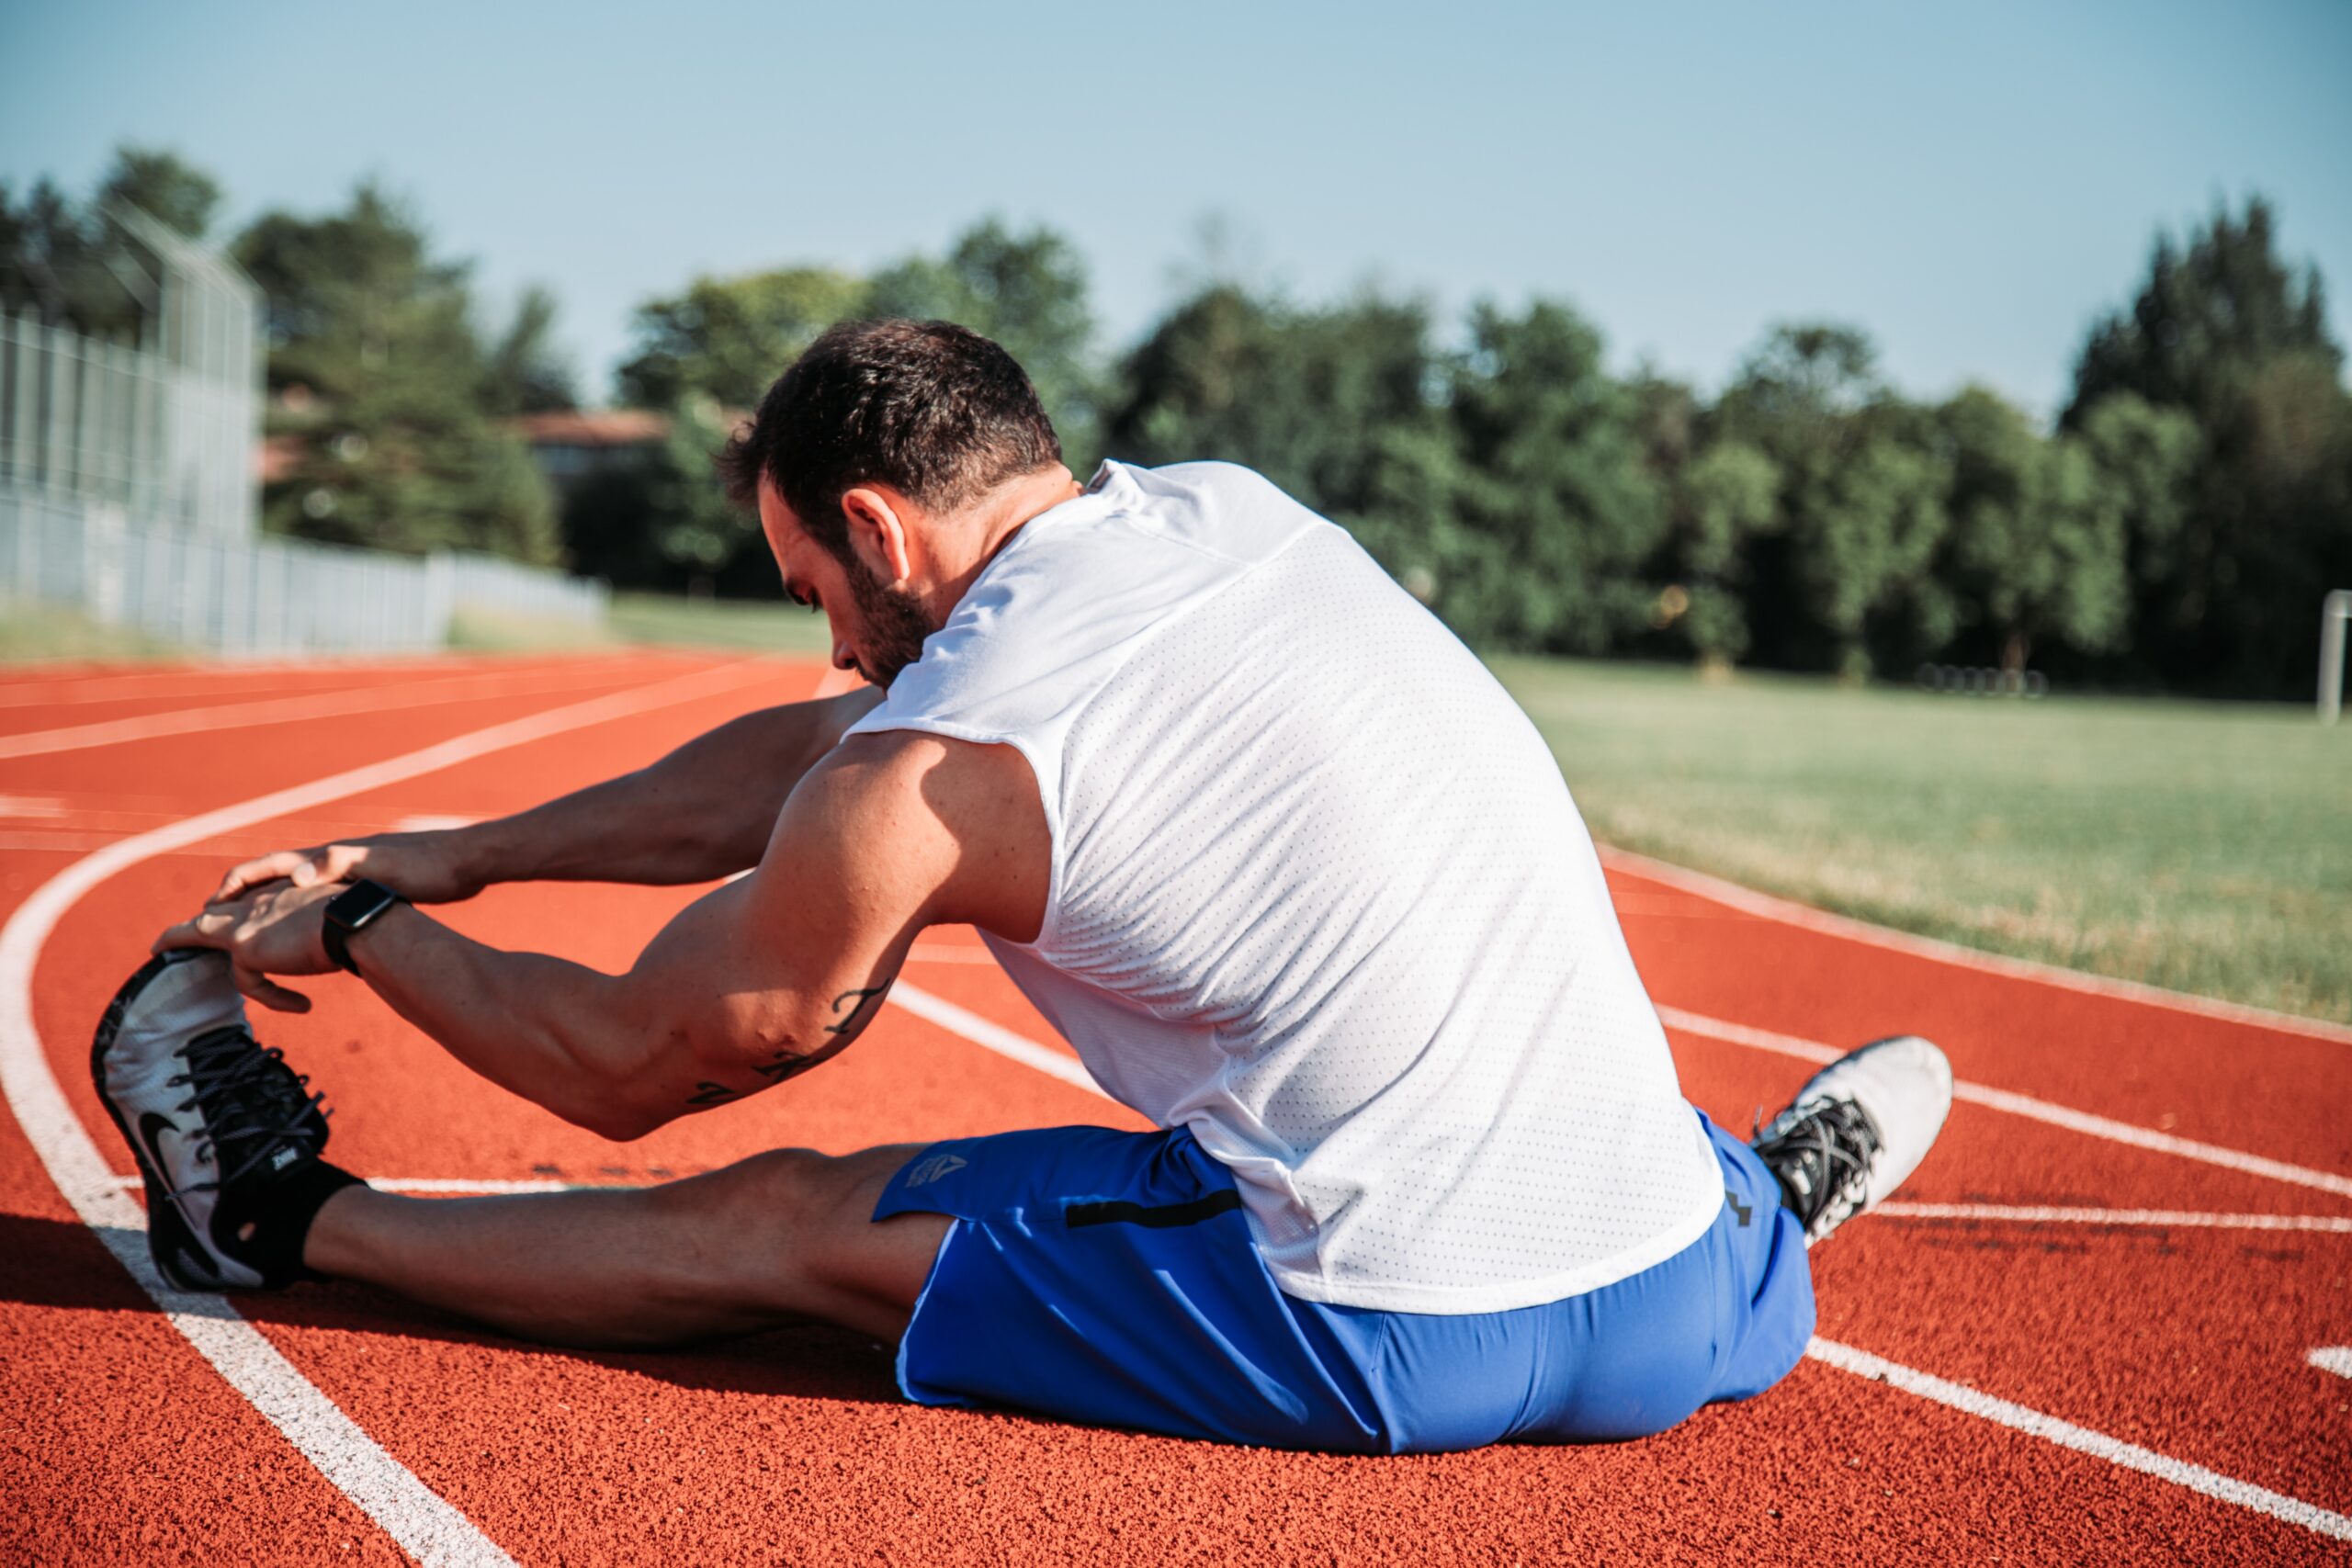 Man stretching his leg on a running track - sports and fitness